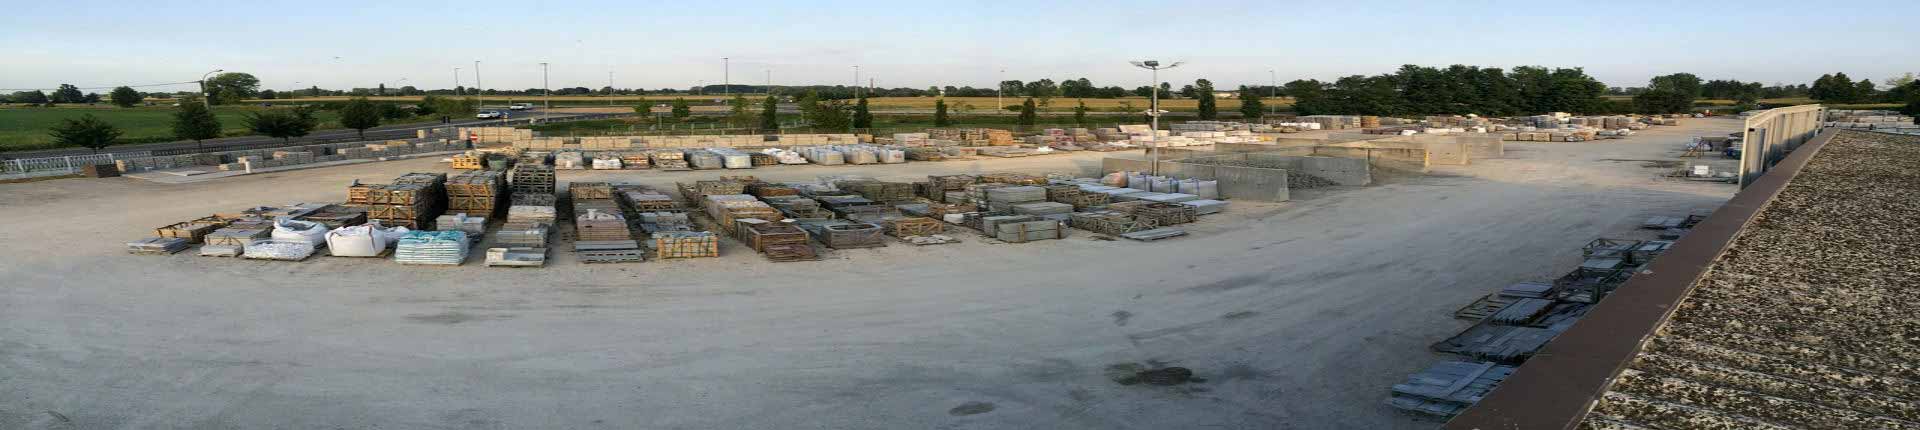 Warehouse of Natural Stones in Crema